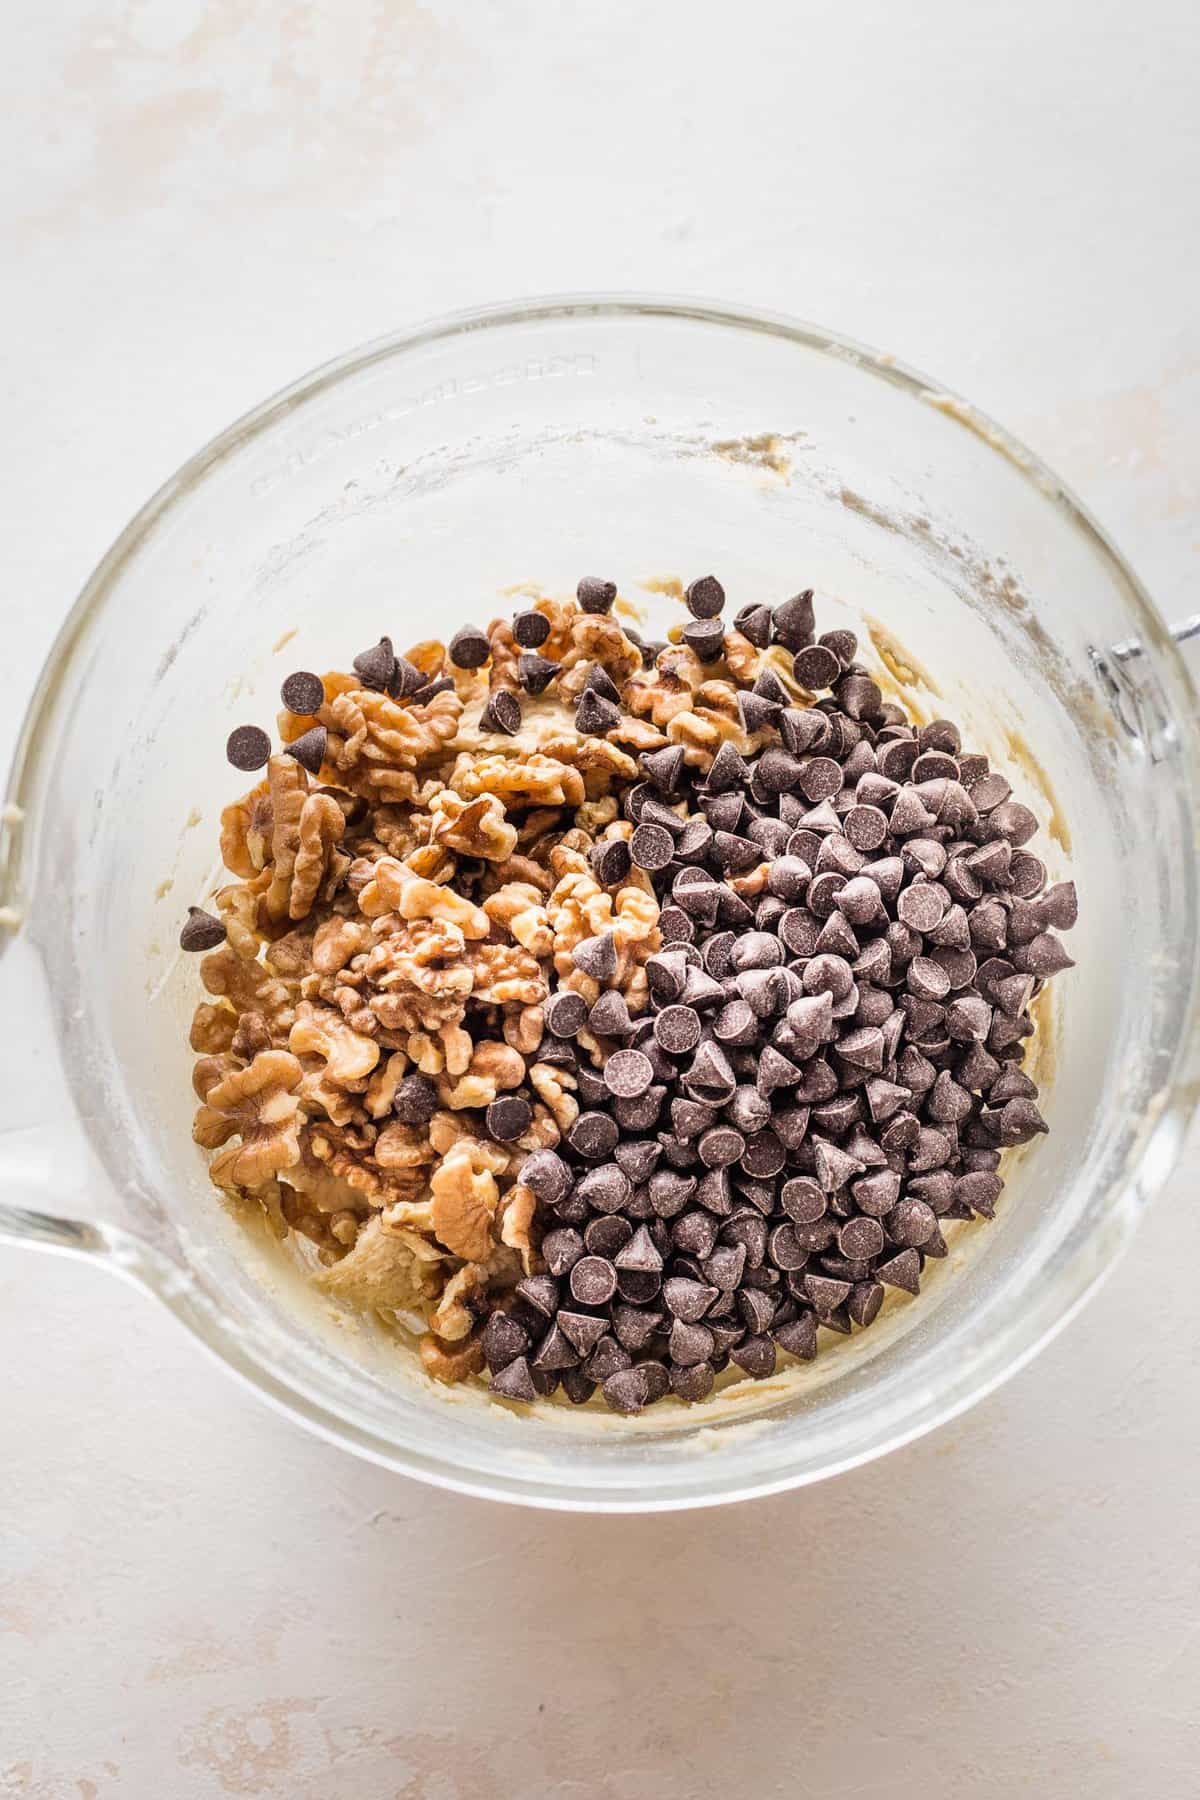 walnuts and chocolate chips added to the stand mixer bowl